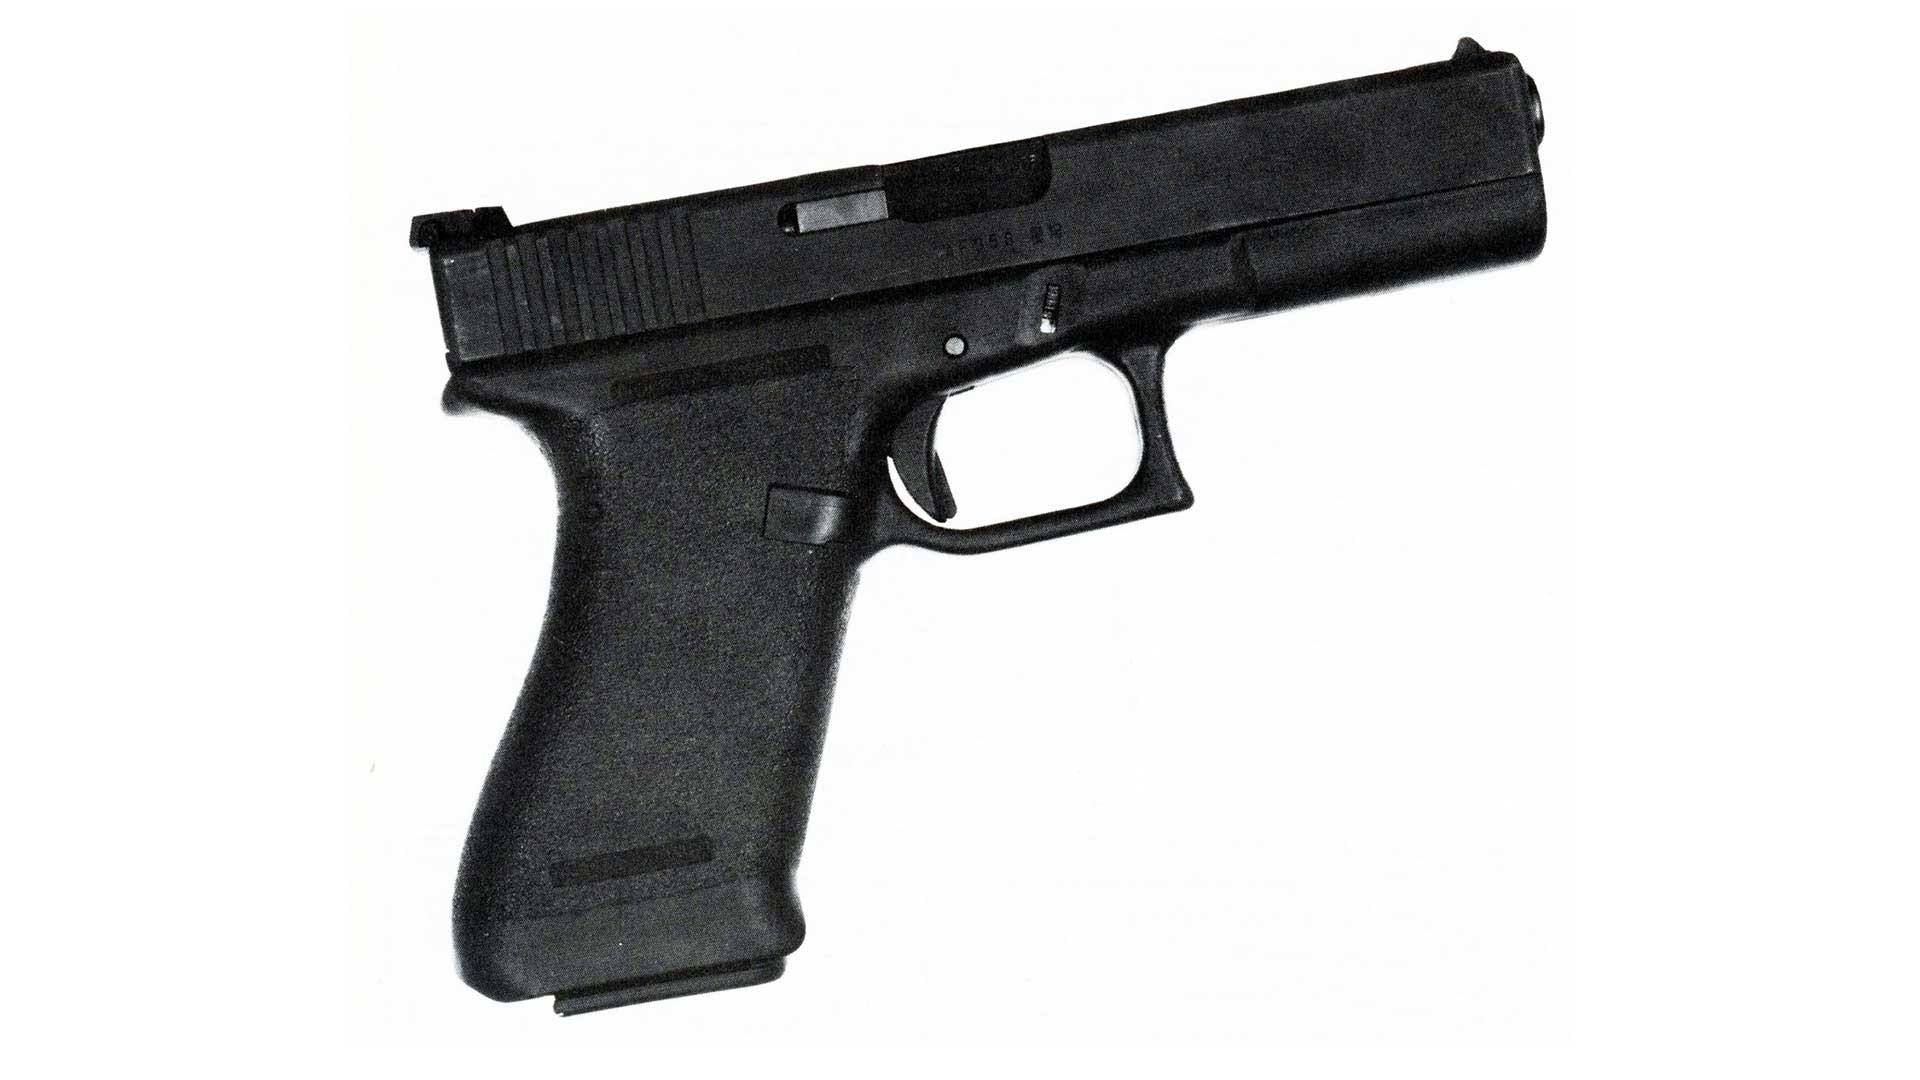 Glock 17 Review: The Ultimate Do It All Handgun?